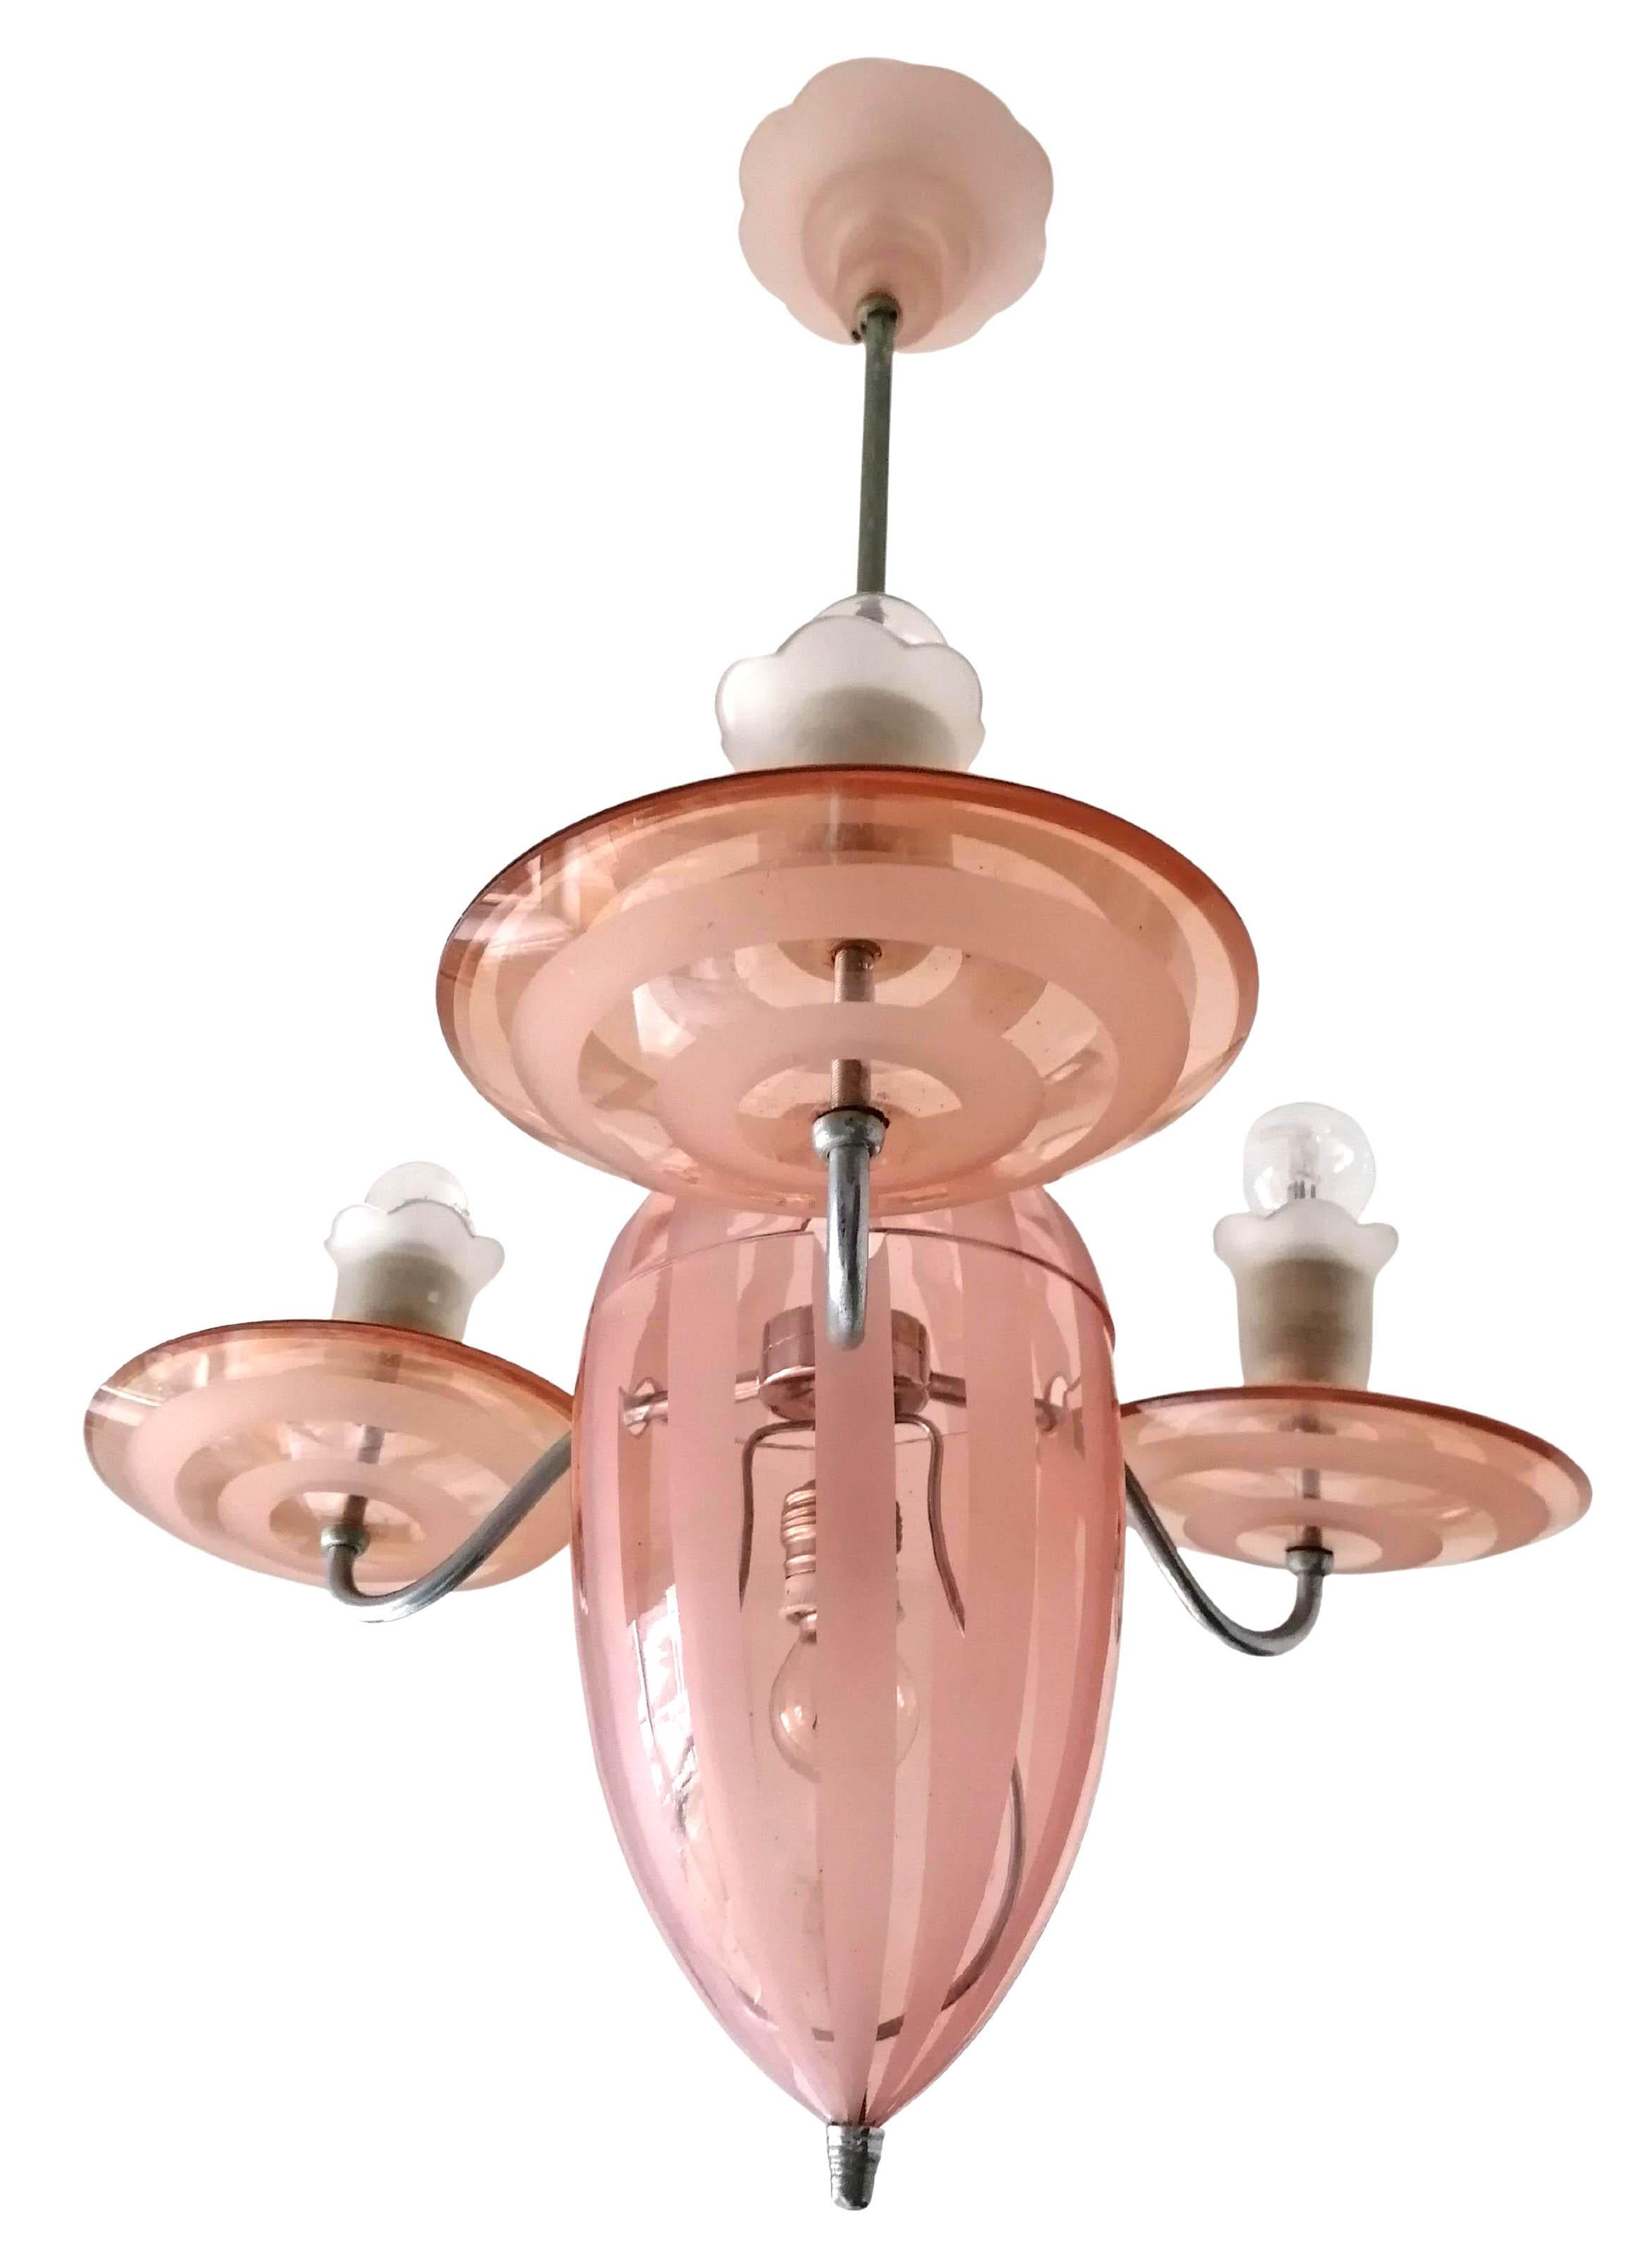 
Superb and unusual French Art Deco chandelier in Pink Etched Glass Stripes and Chrome Brass C1920
Cleaned and with porcelain sockets it was rewired and it accommodates 4 household bulbs E-26.Good working condition, 
Assembly required.
 